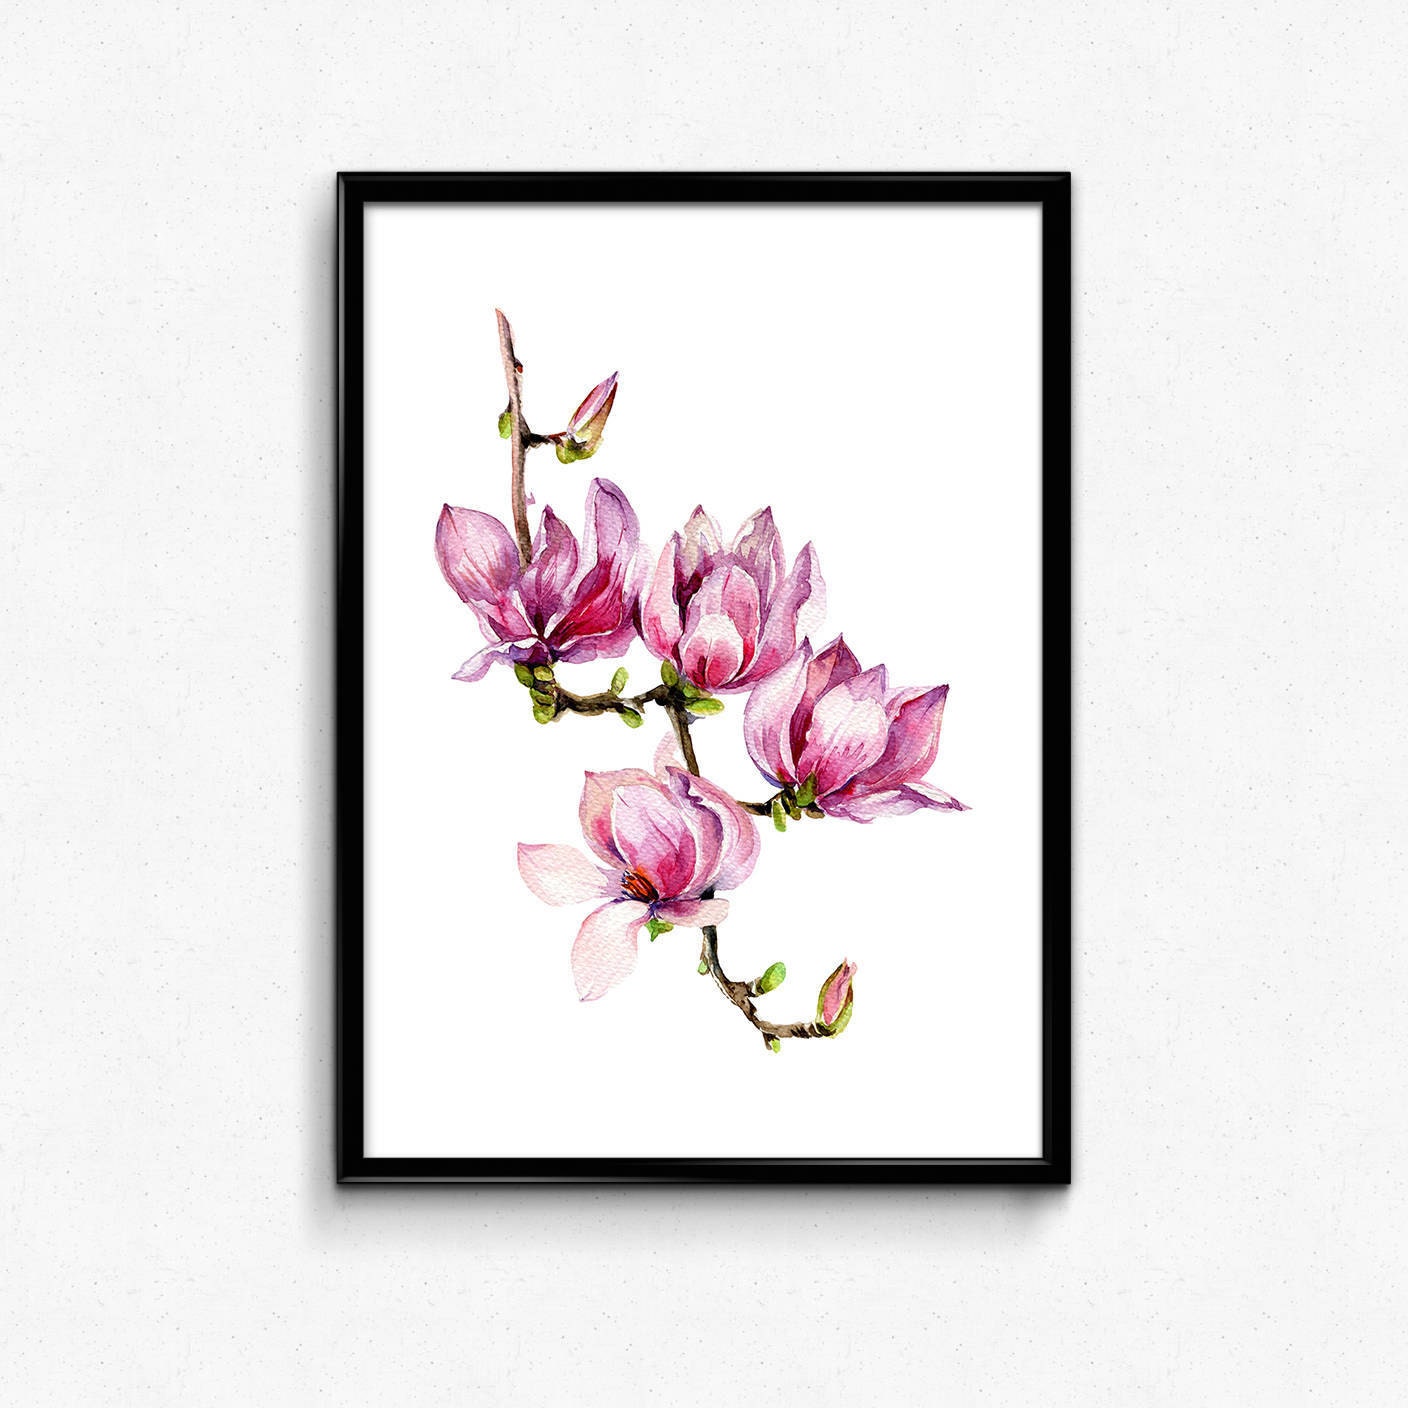 Magnolia Flower Watercolor Art Watercolor Painting Home | Etsy